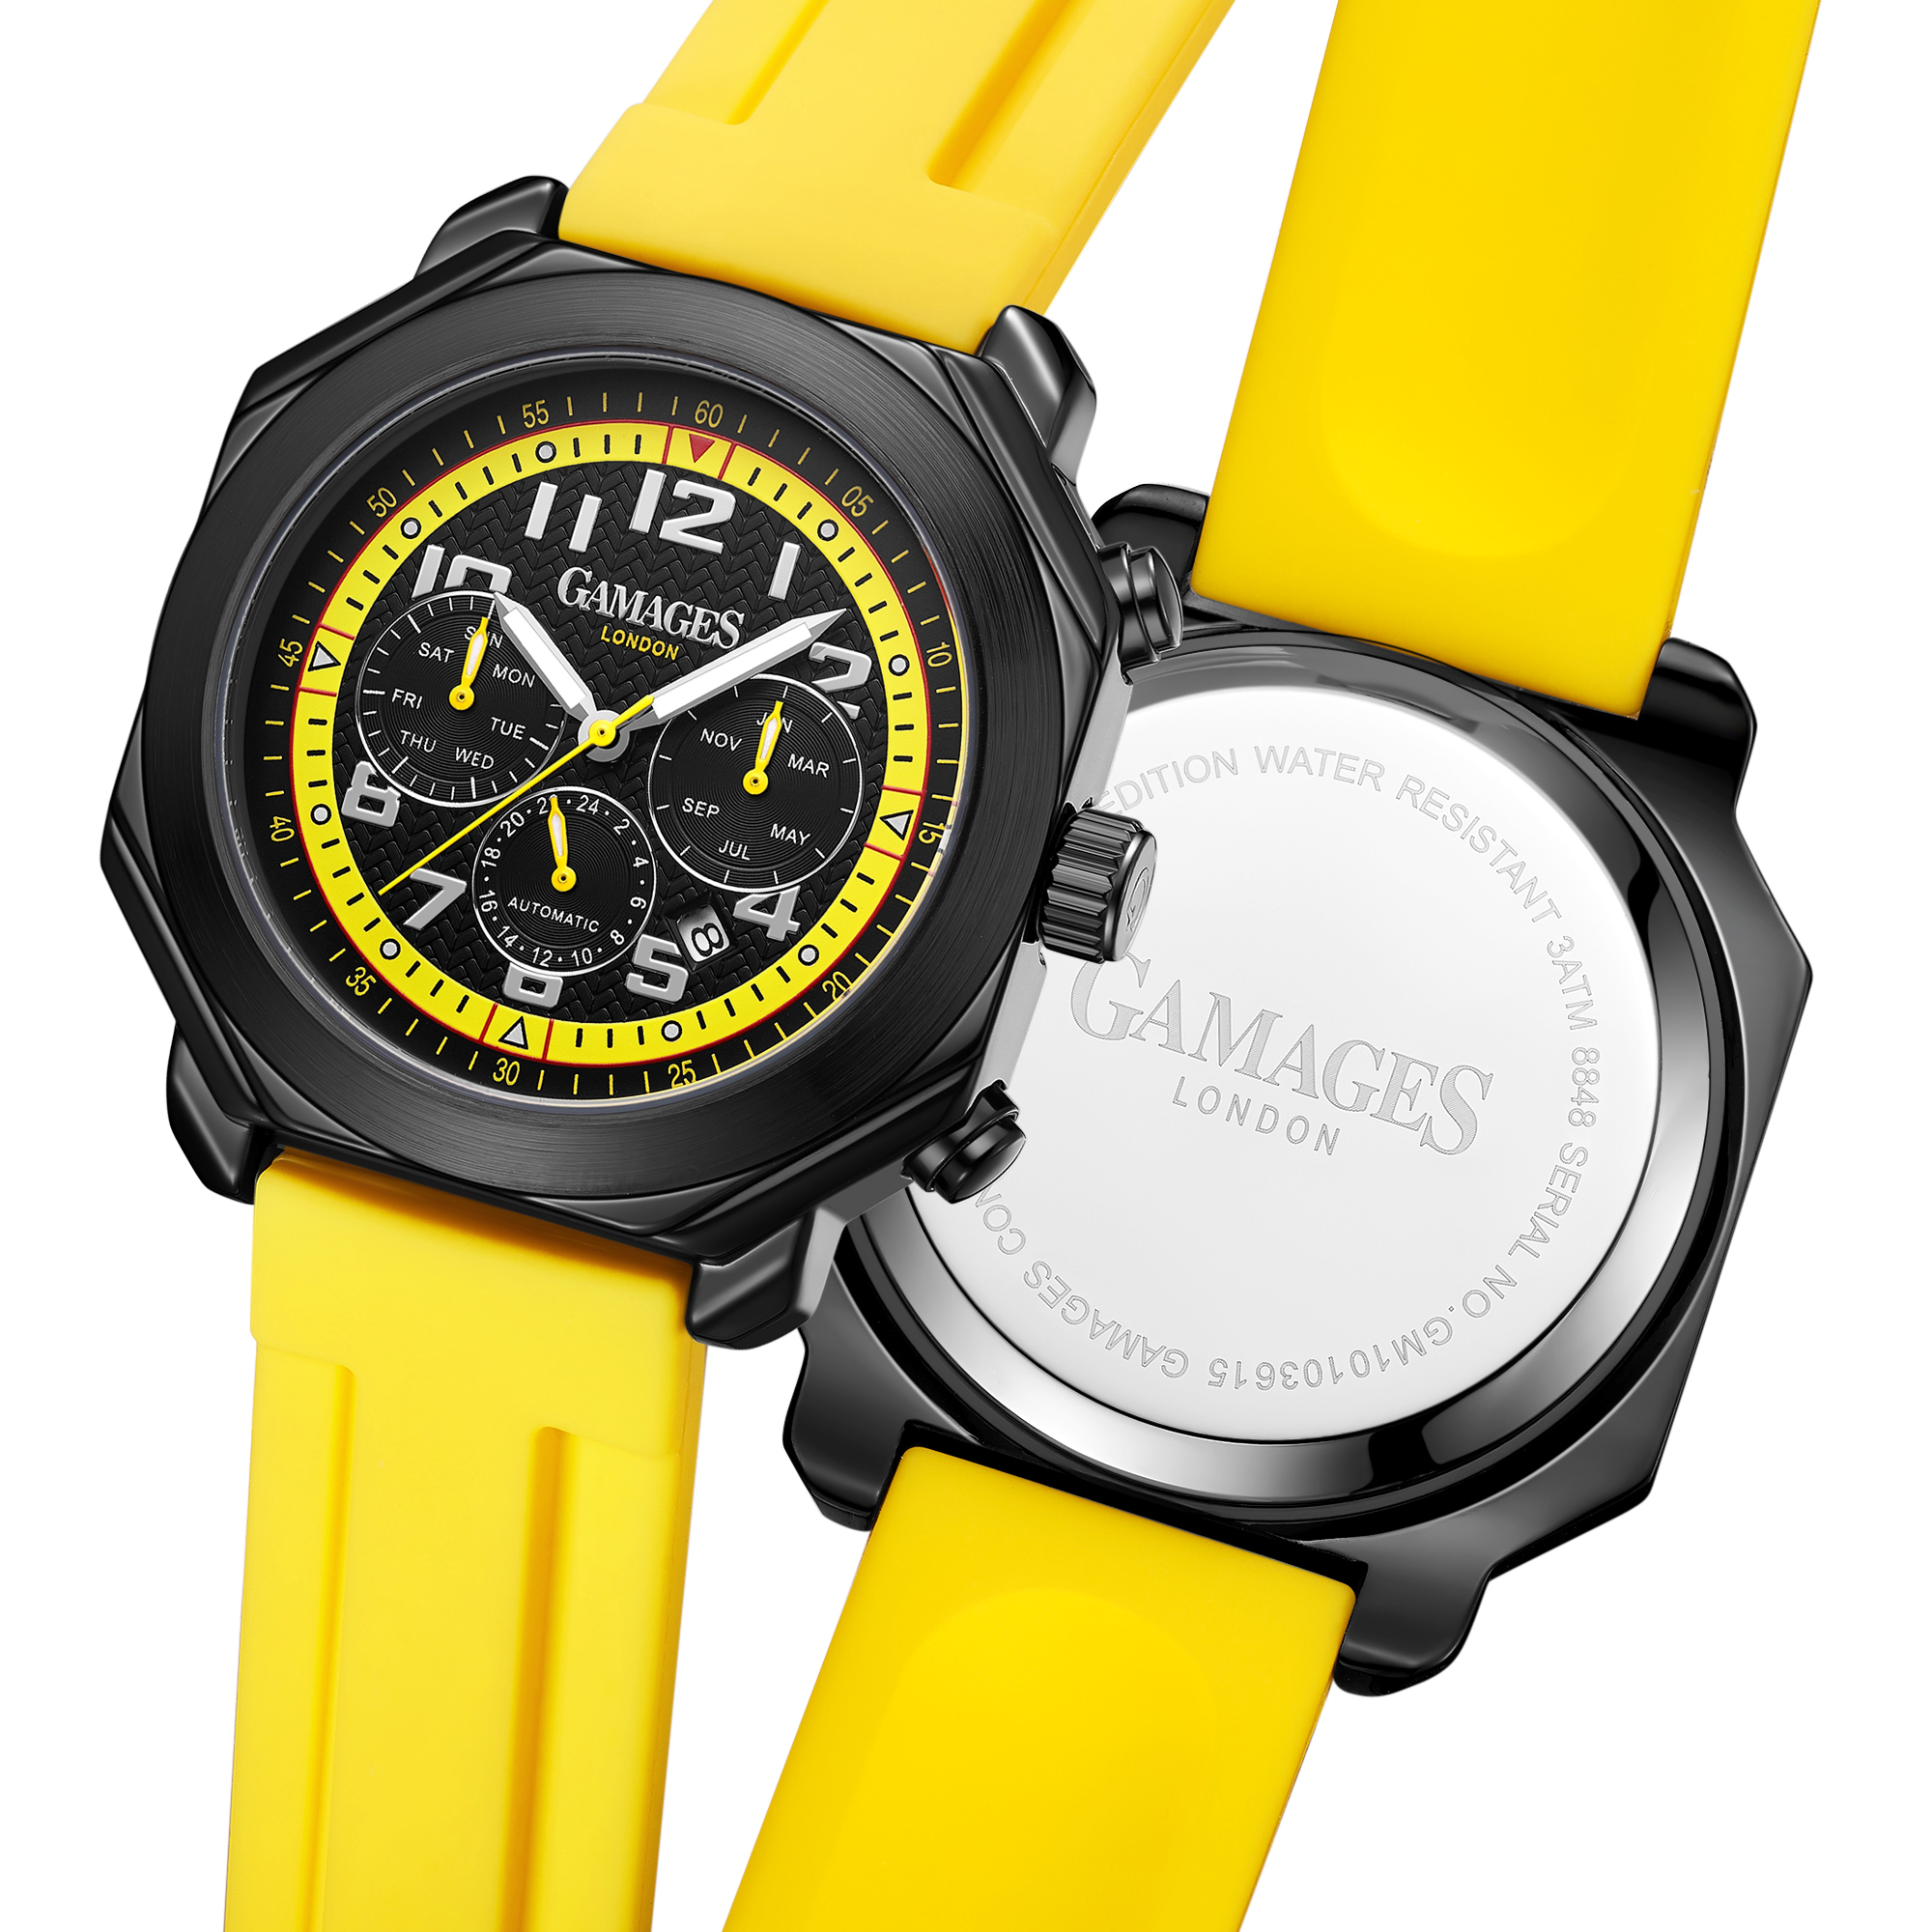 Ltd Edition Hand Assembled Gamages Contemporary Automatic Yellow – 5 Year Warranty & Free Delivery - Image 5 of 6